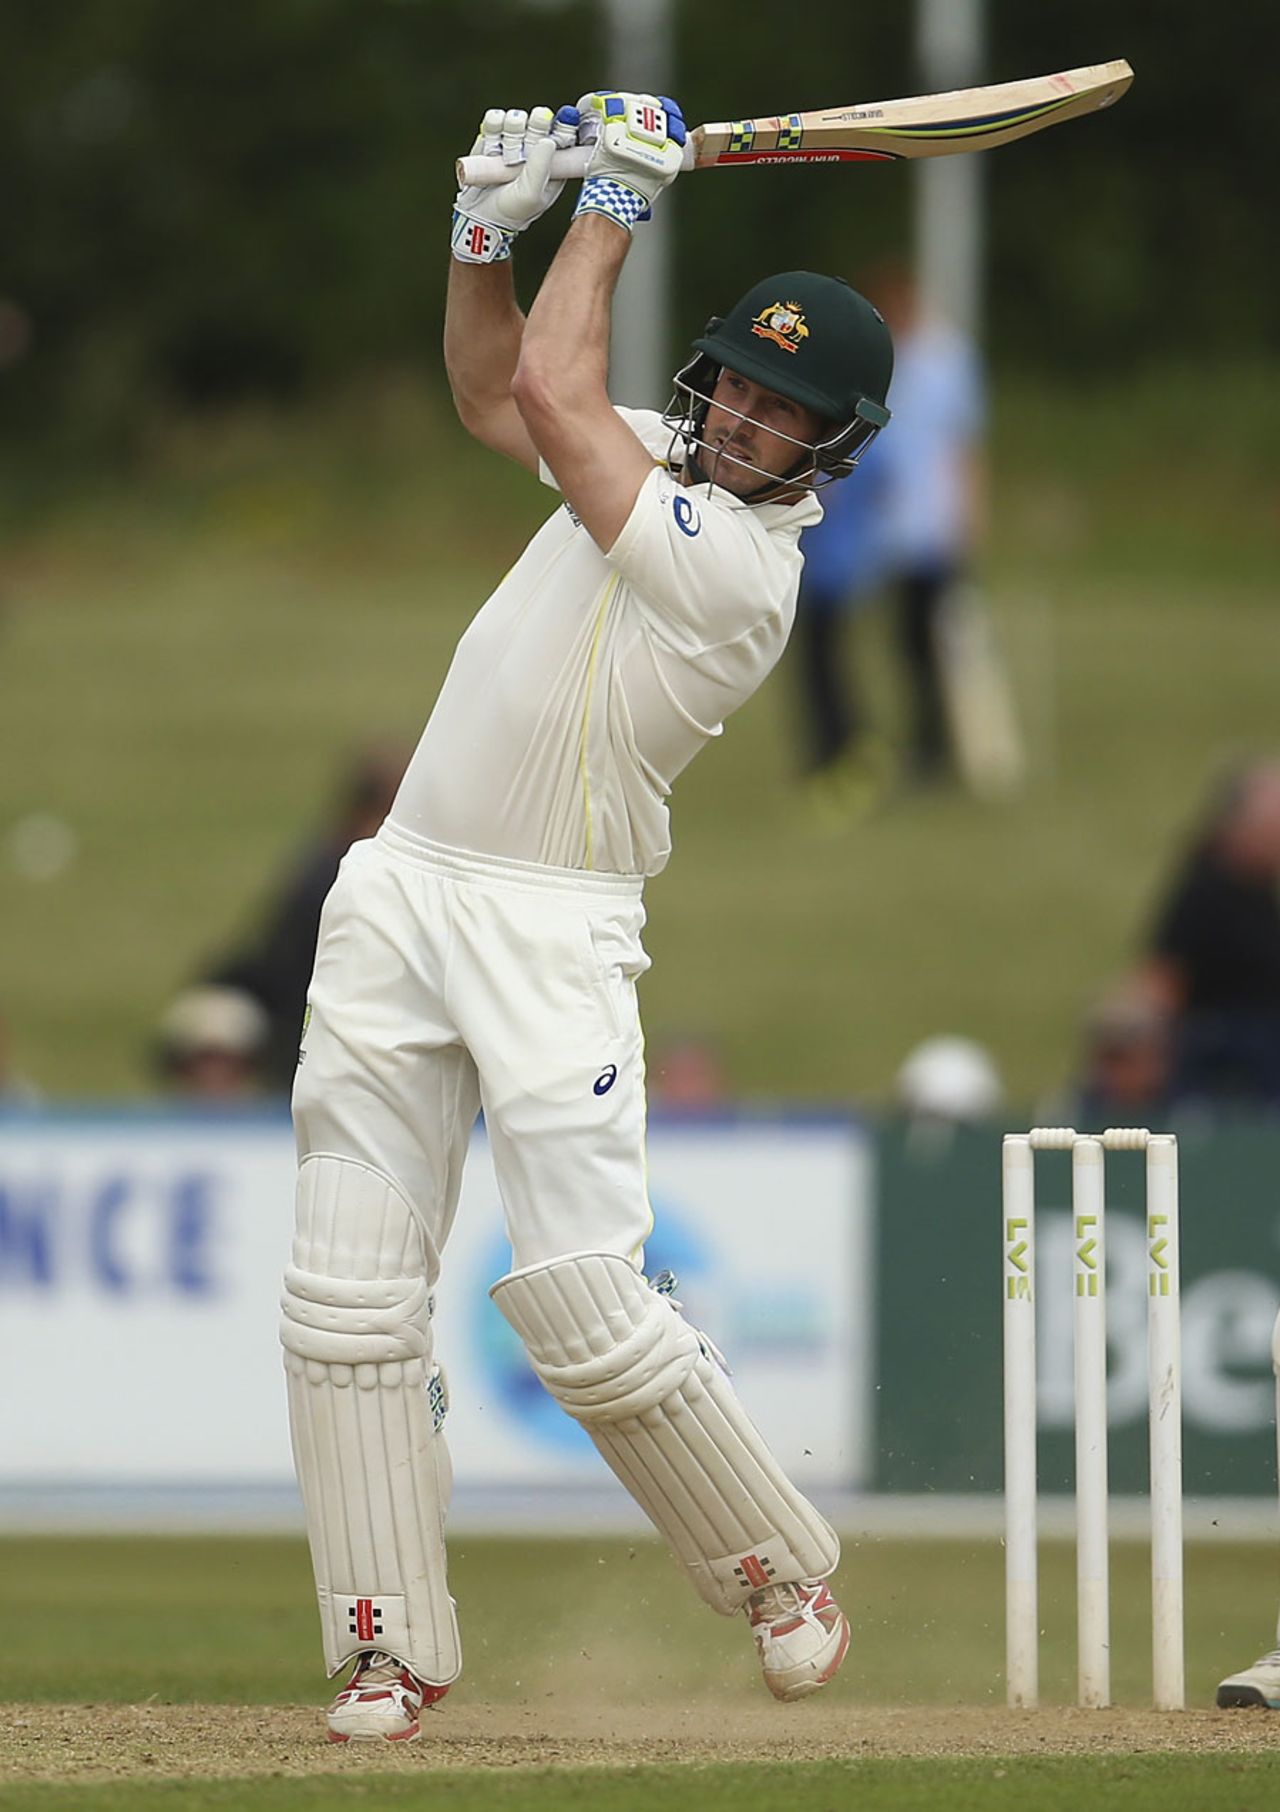 Shaun Marsh retired after reaching his hundred, Derbyshire v Australians, Tour match, Derby, 1st day, July 23, 2015